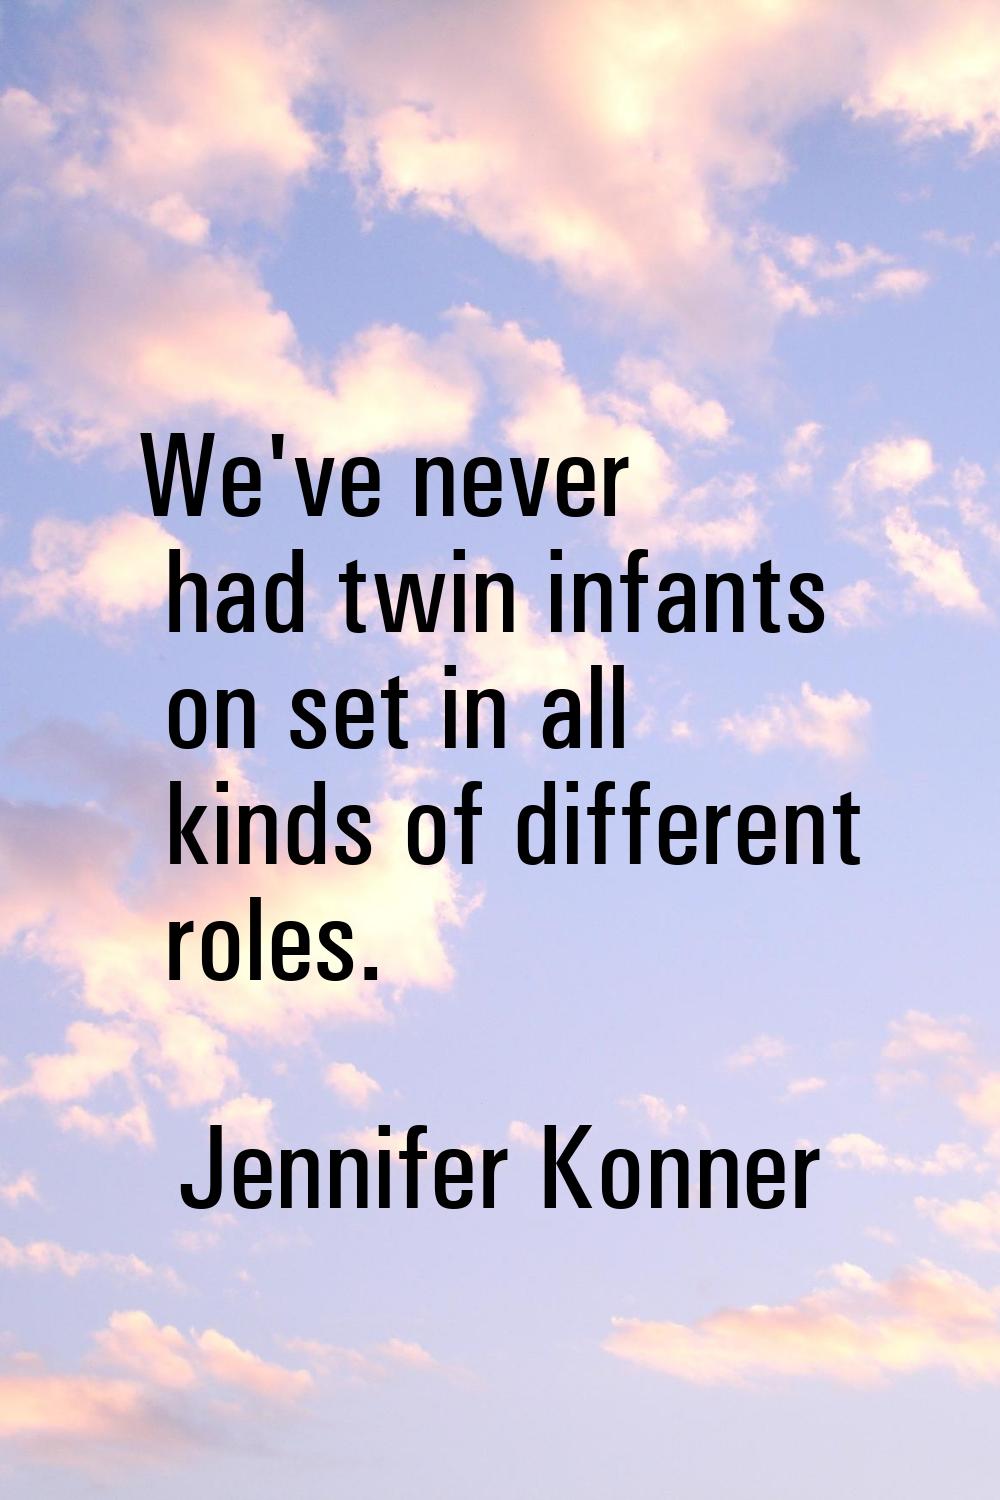 We've never had twin infants on set in all kinds of different roles.